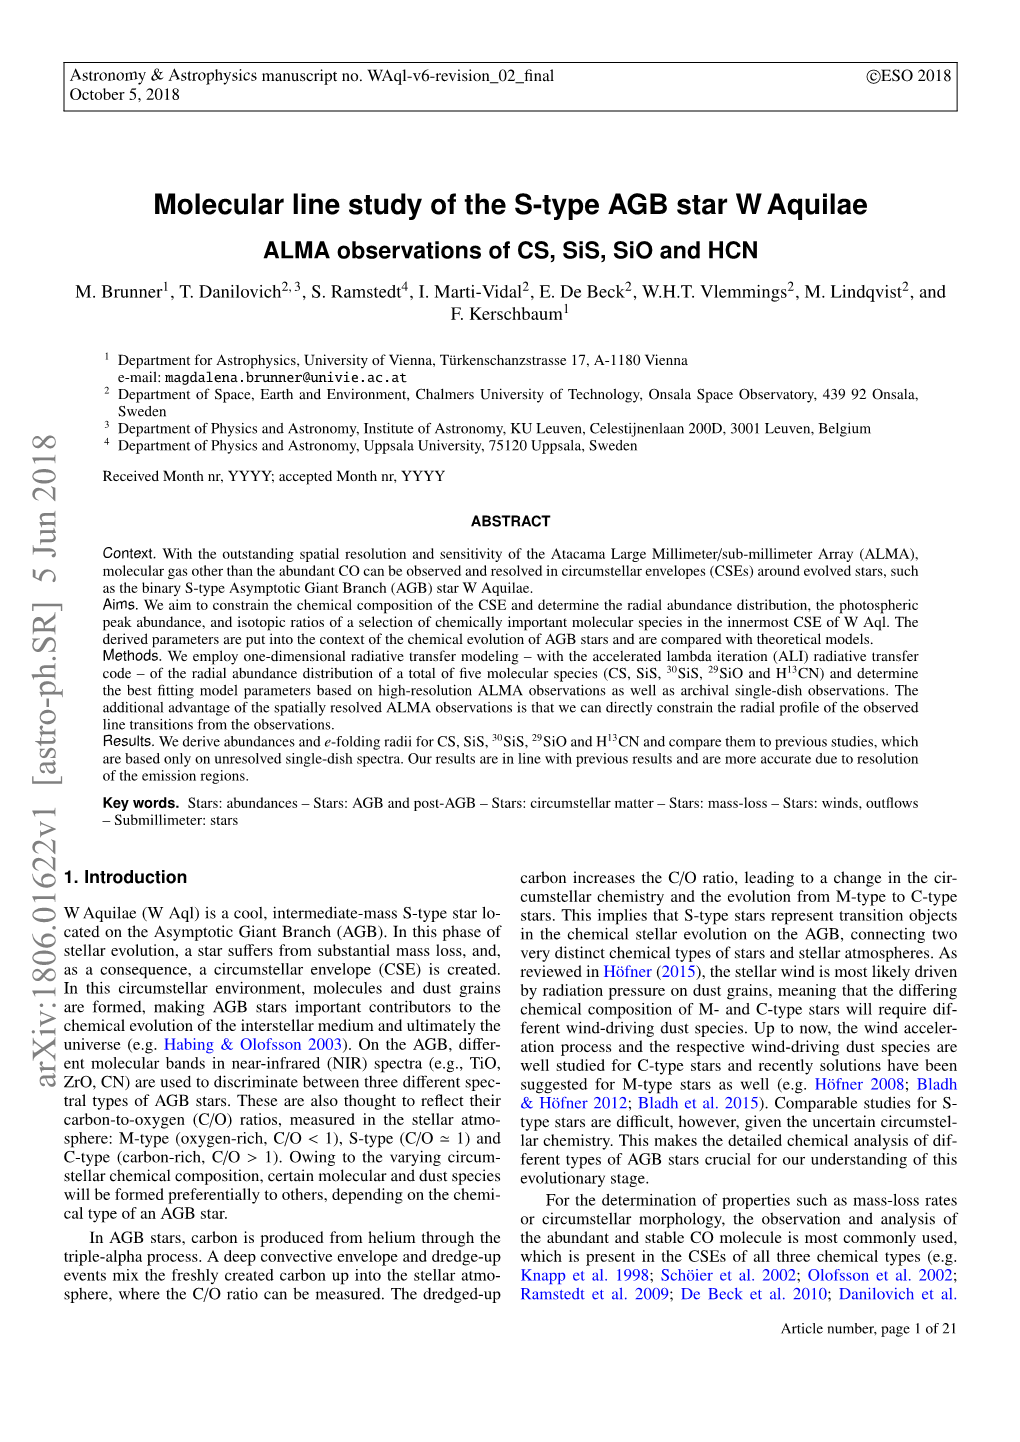 Molecular Line Study of the S-Type AGB Star W Aquilae ALMA Observations of CS, Sis, Sio and HCN